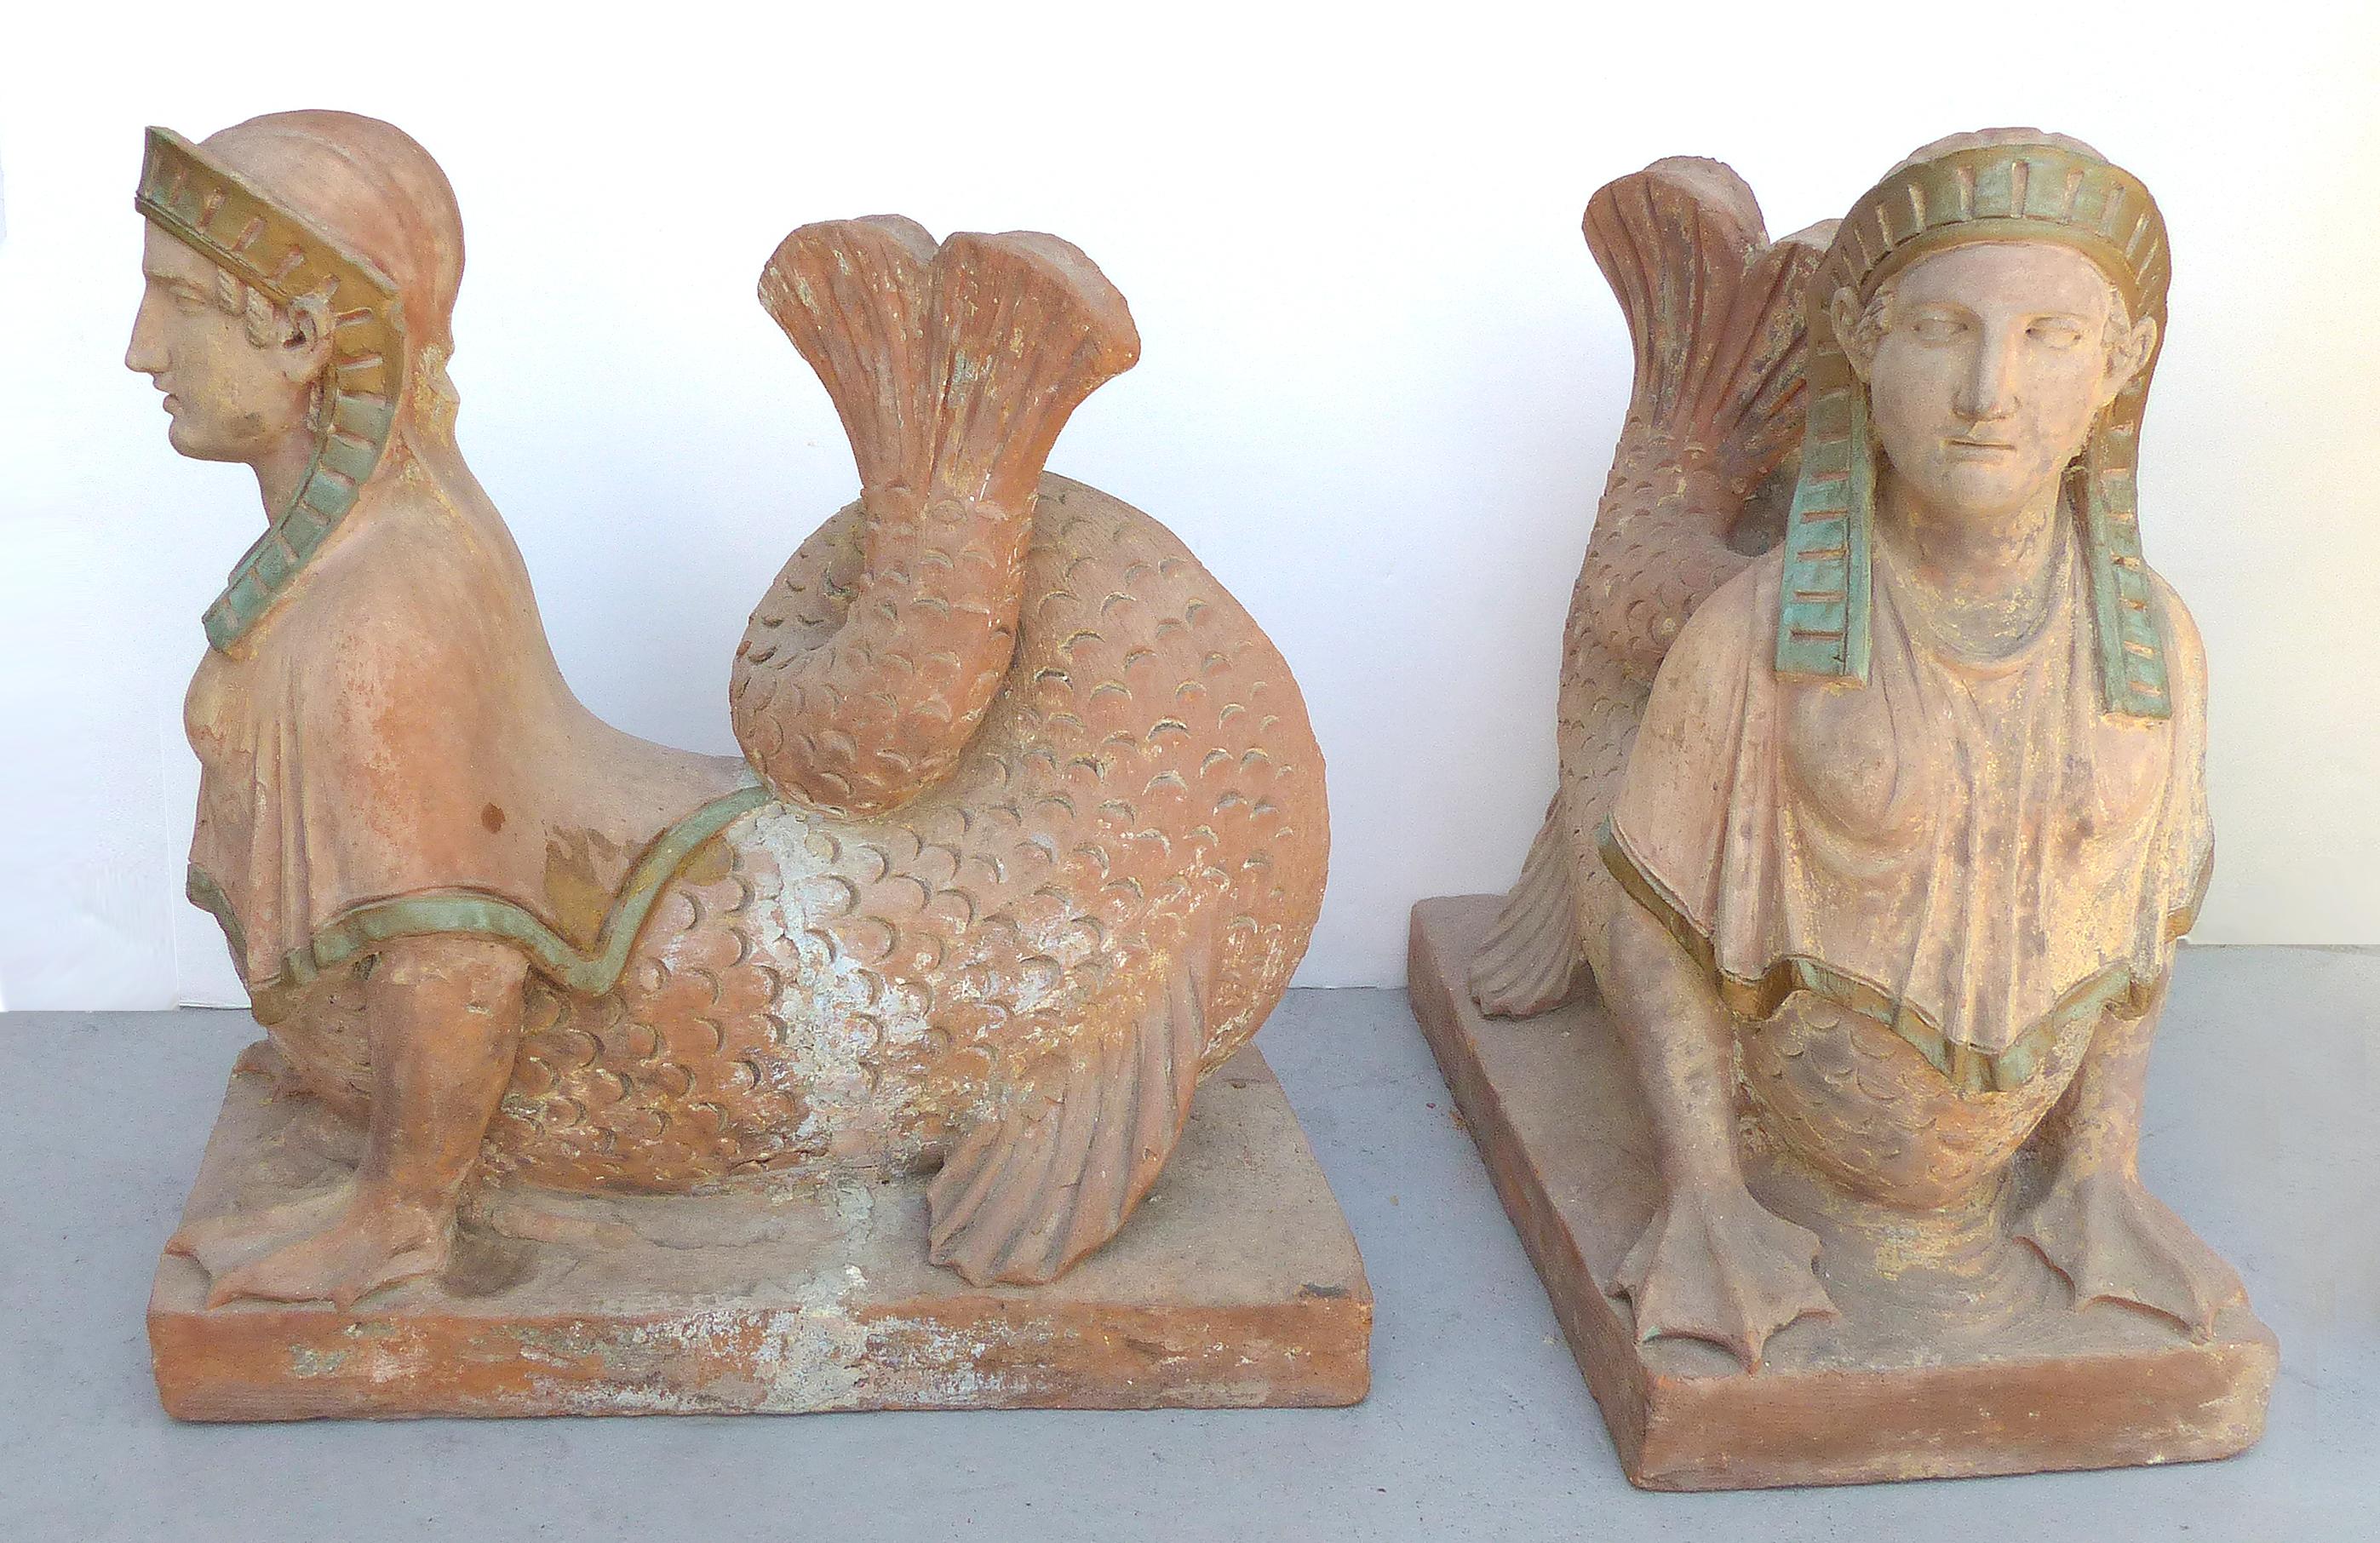 Polychromed 18th Century Continental Terracotta Egyptian Revival Sphinxes, a Matched Pair For Sale